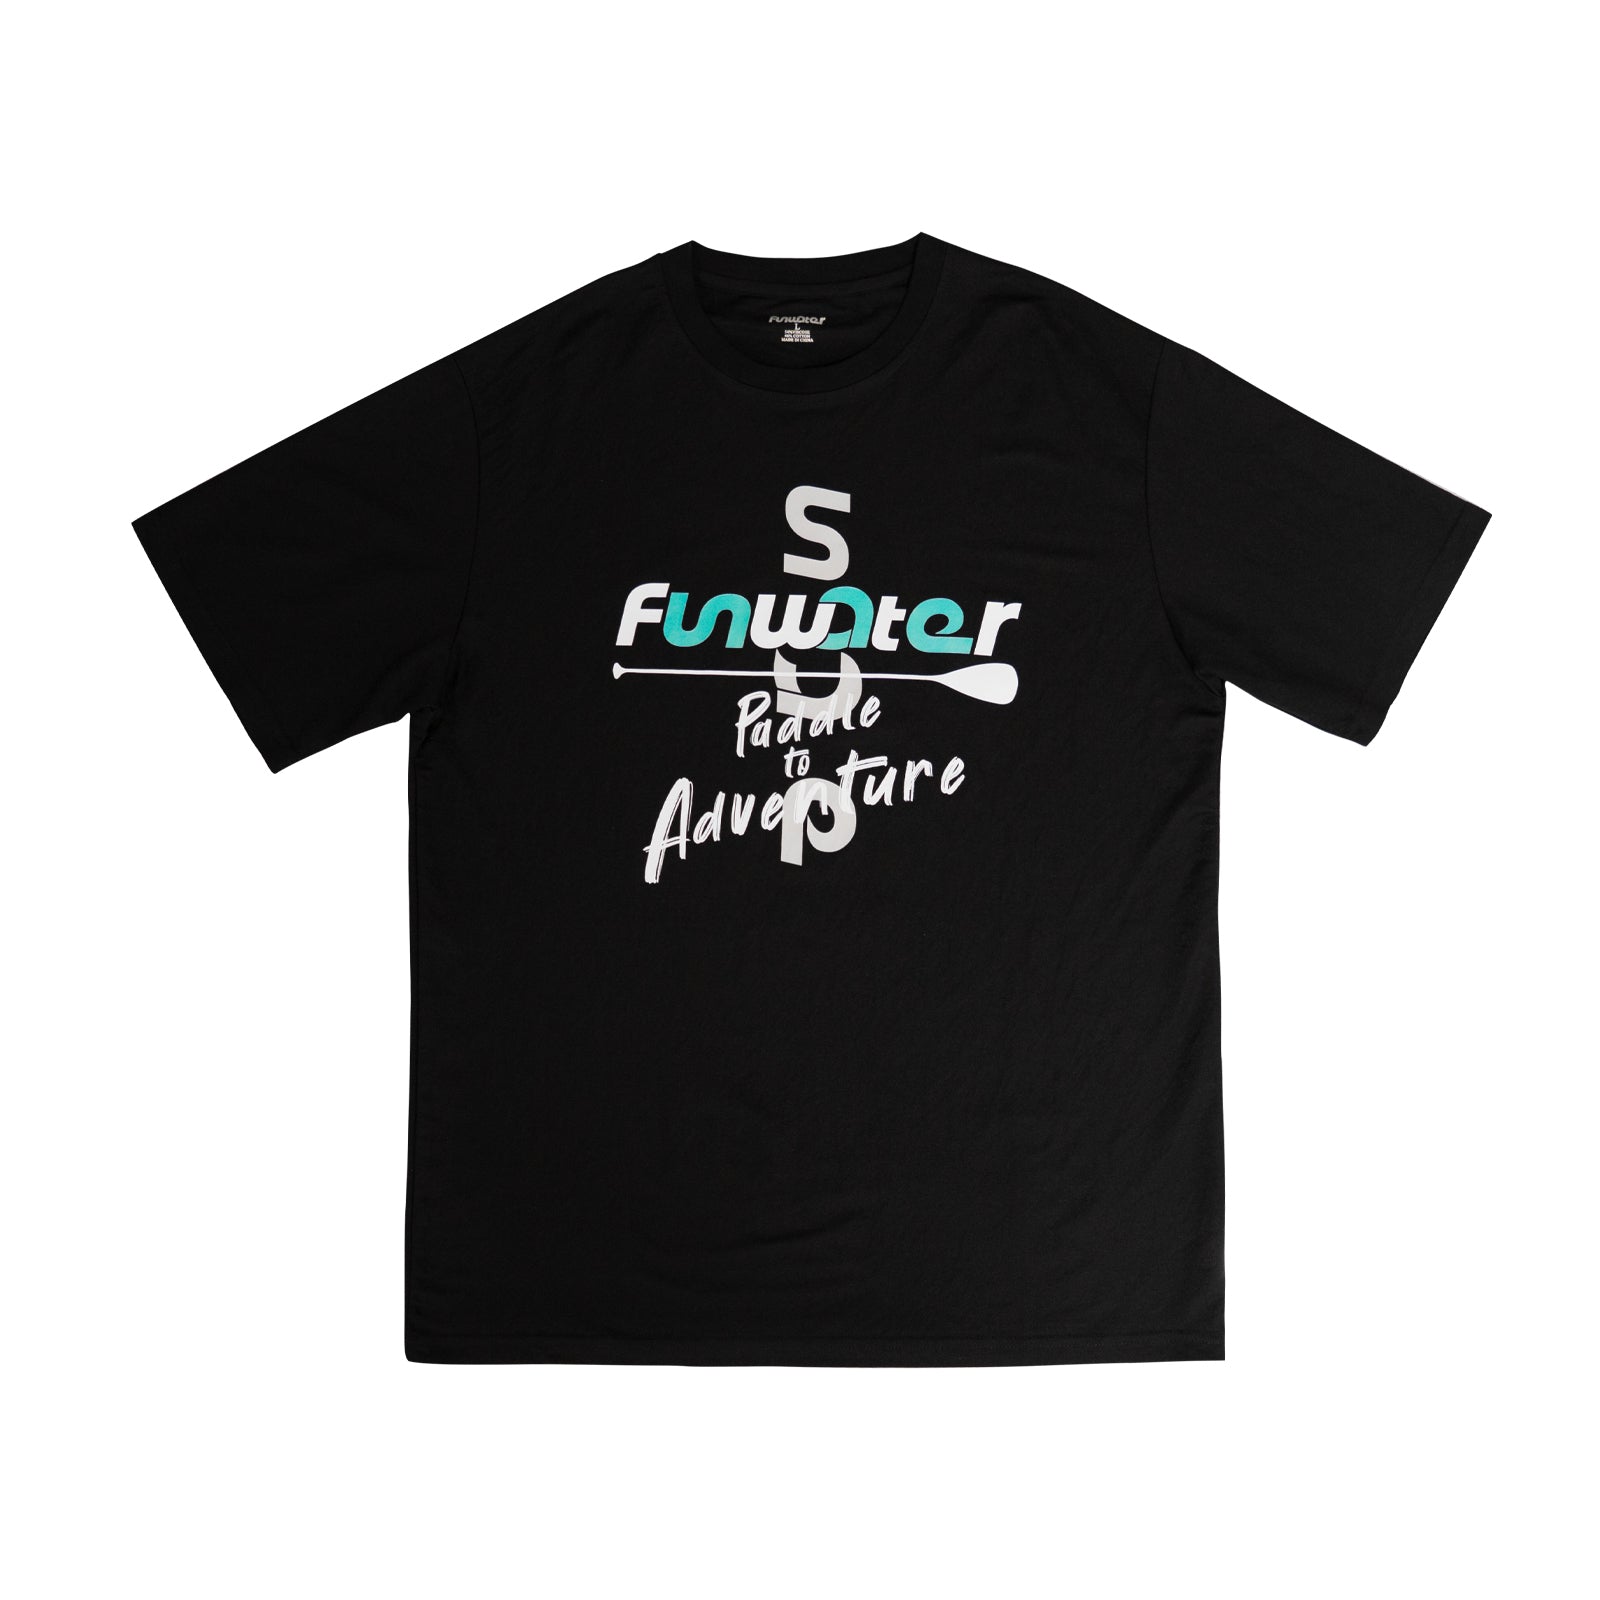 funwater stand up paddle board outdoor leisure sports black round neck T-shirt